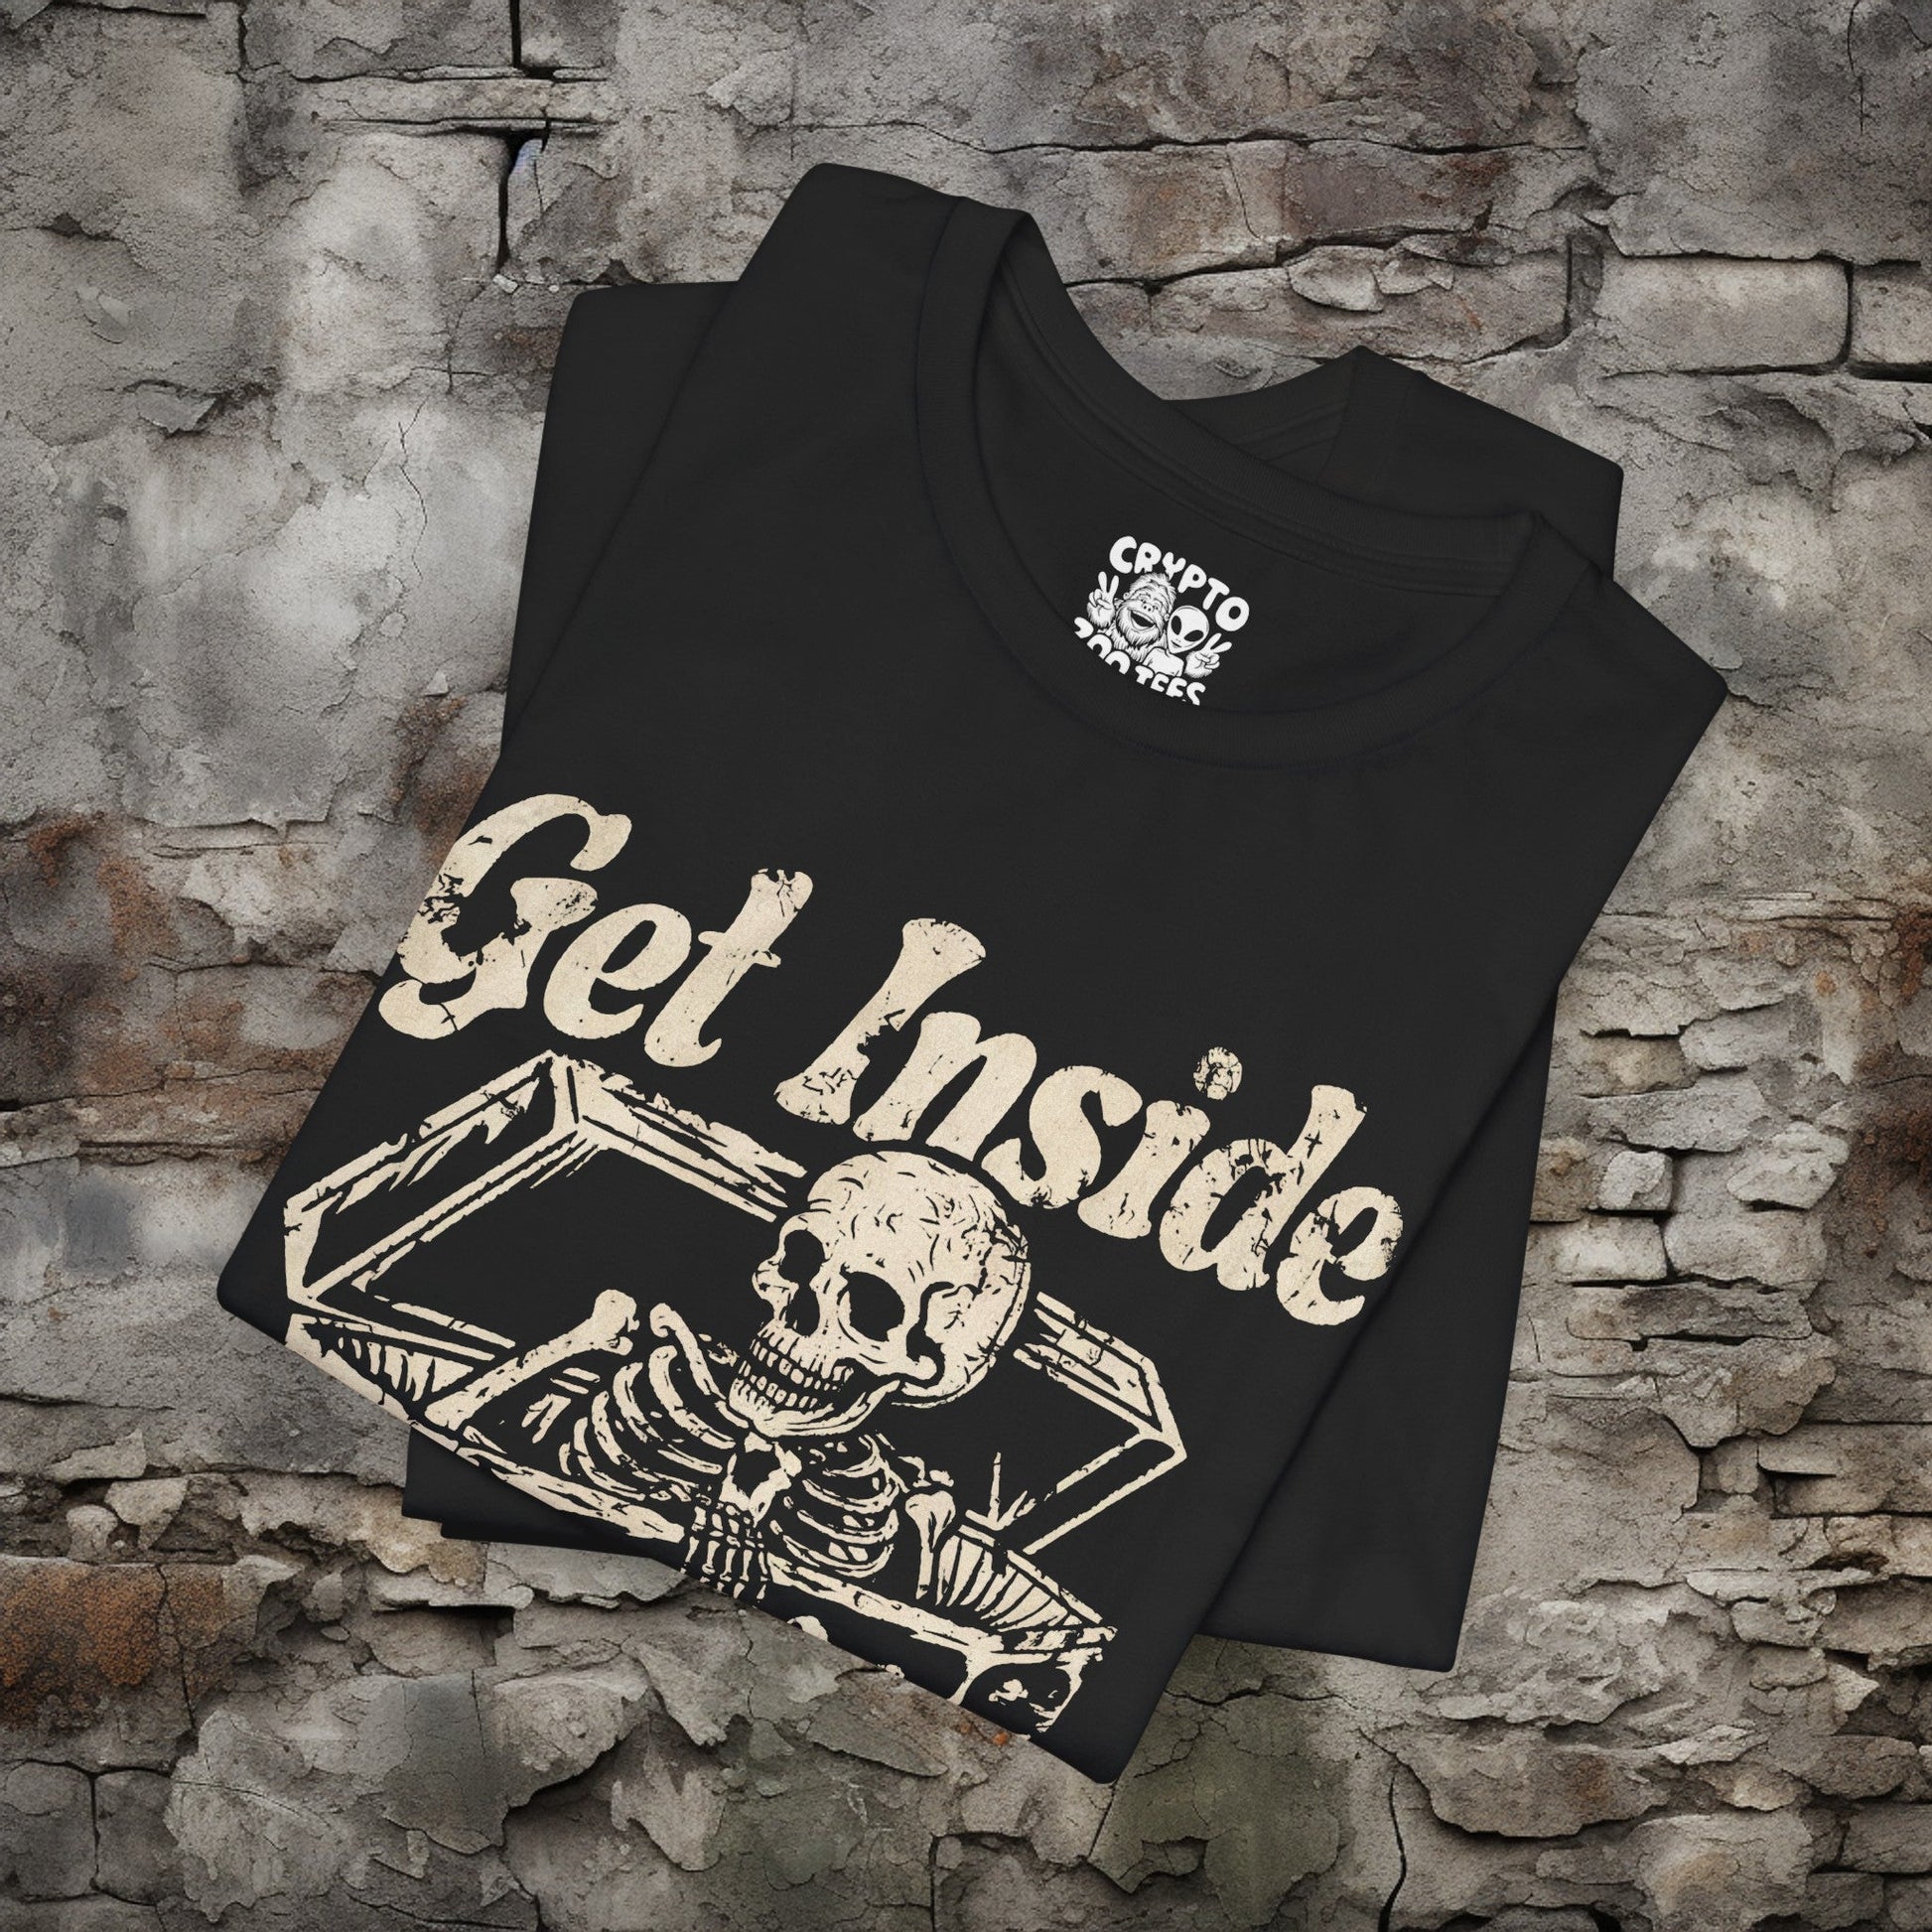 T-Shirt - Get Inside Loser Tee | Skeleton in Coffin Goth Dark Humor Shirt | Bella + Canvas Unisex T-shirt from Crypto Zoo Tees